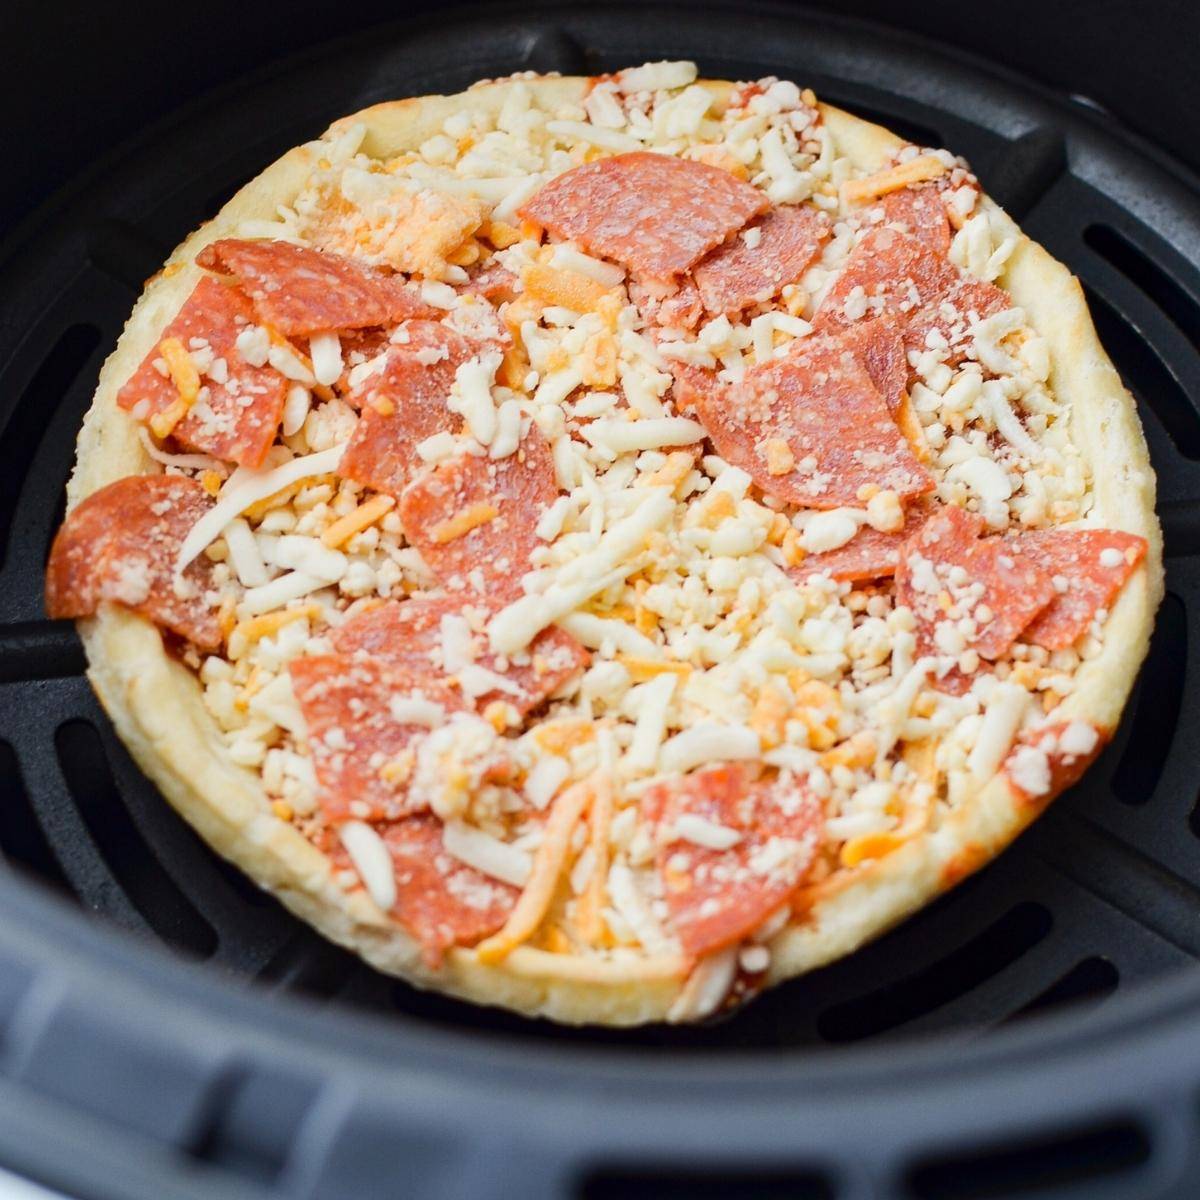 Air Fryer Mini Pizza in 10 Minutes - Tasty Oven